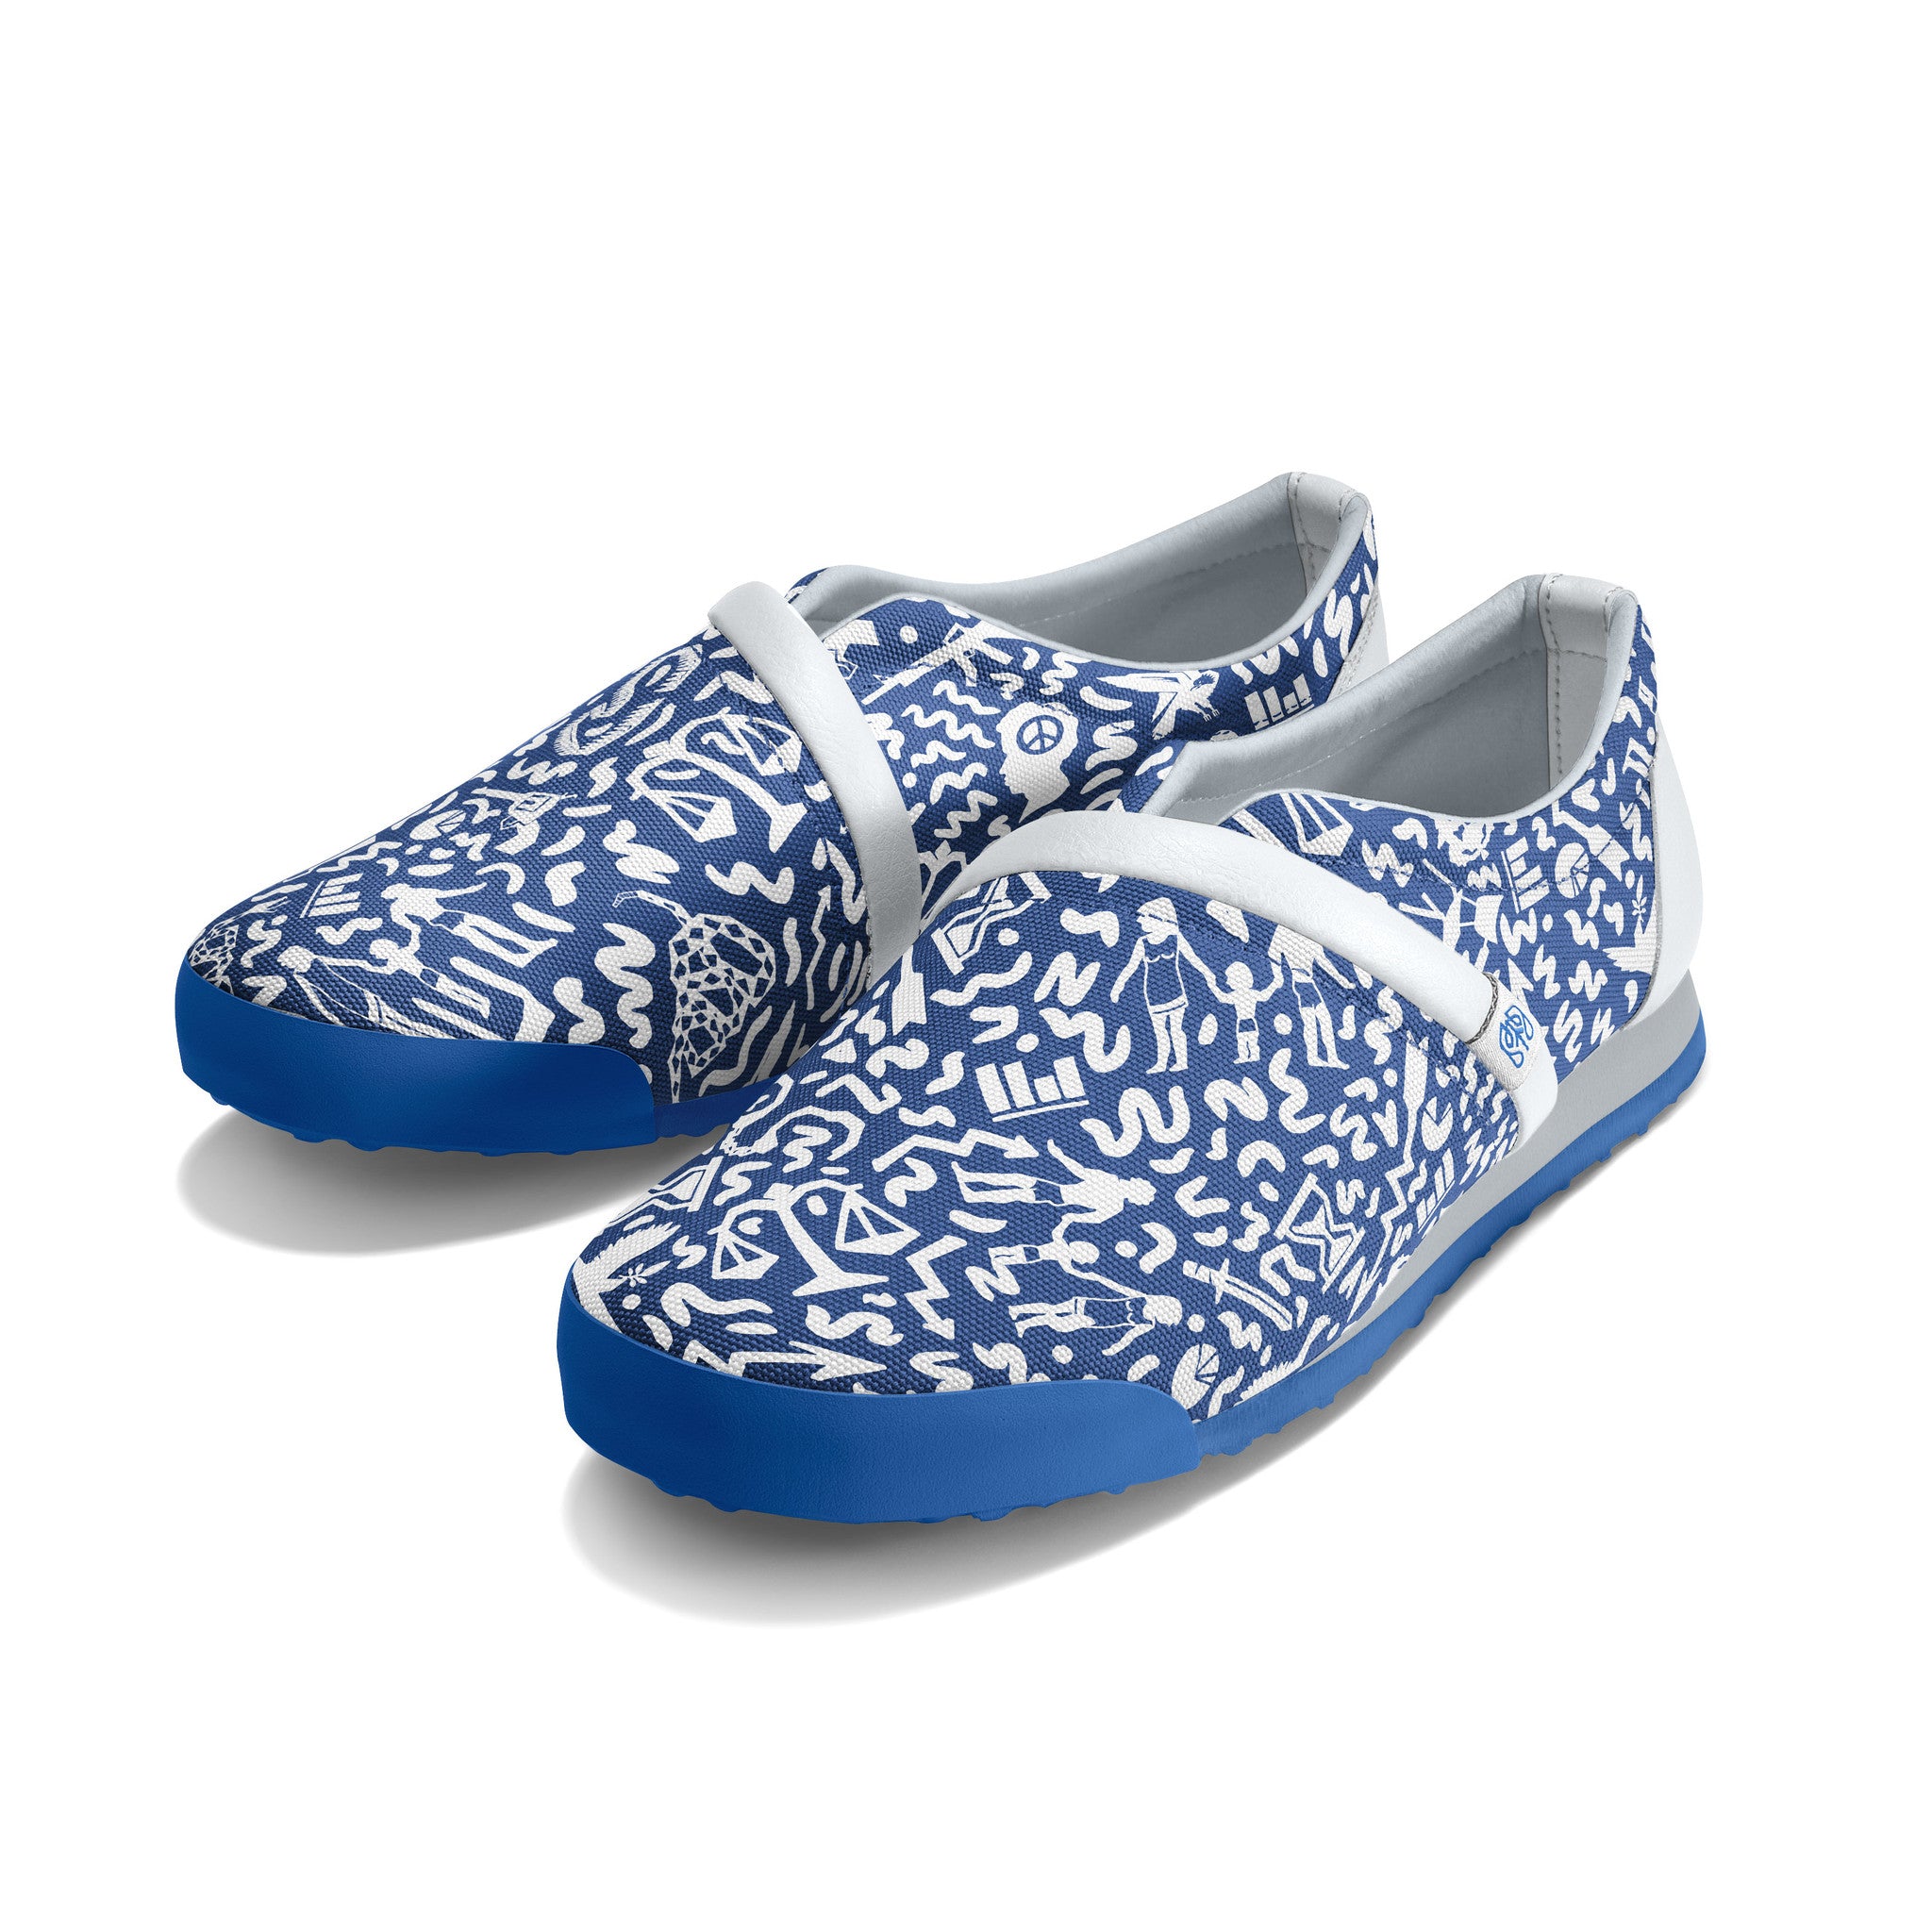 Strong_Blue - Common Ground Footwear Shoes Left Perspective View